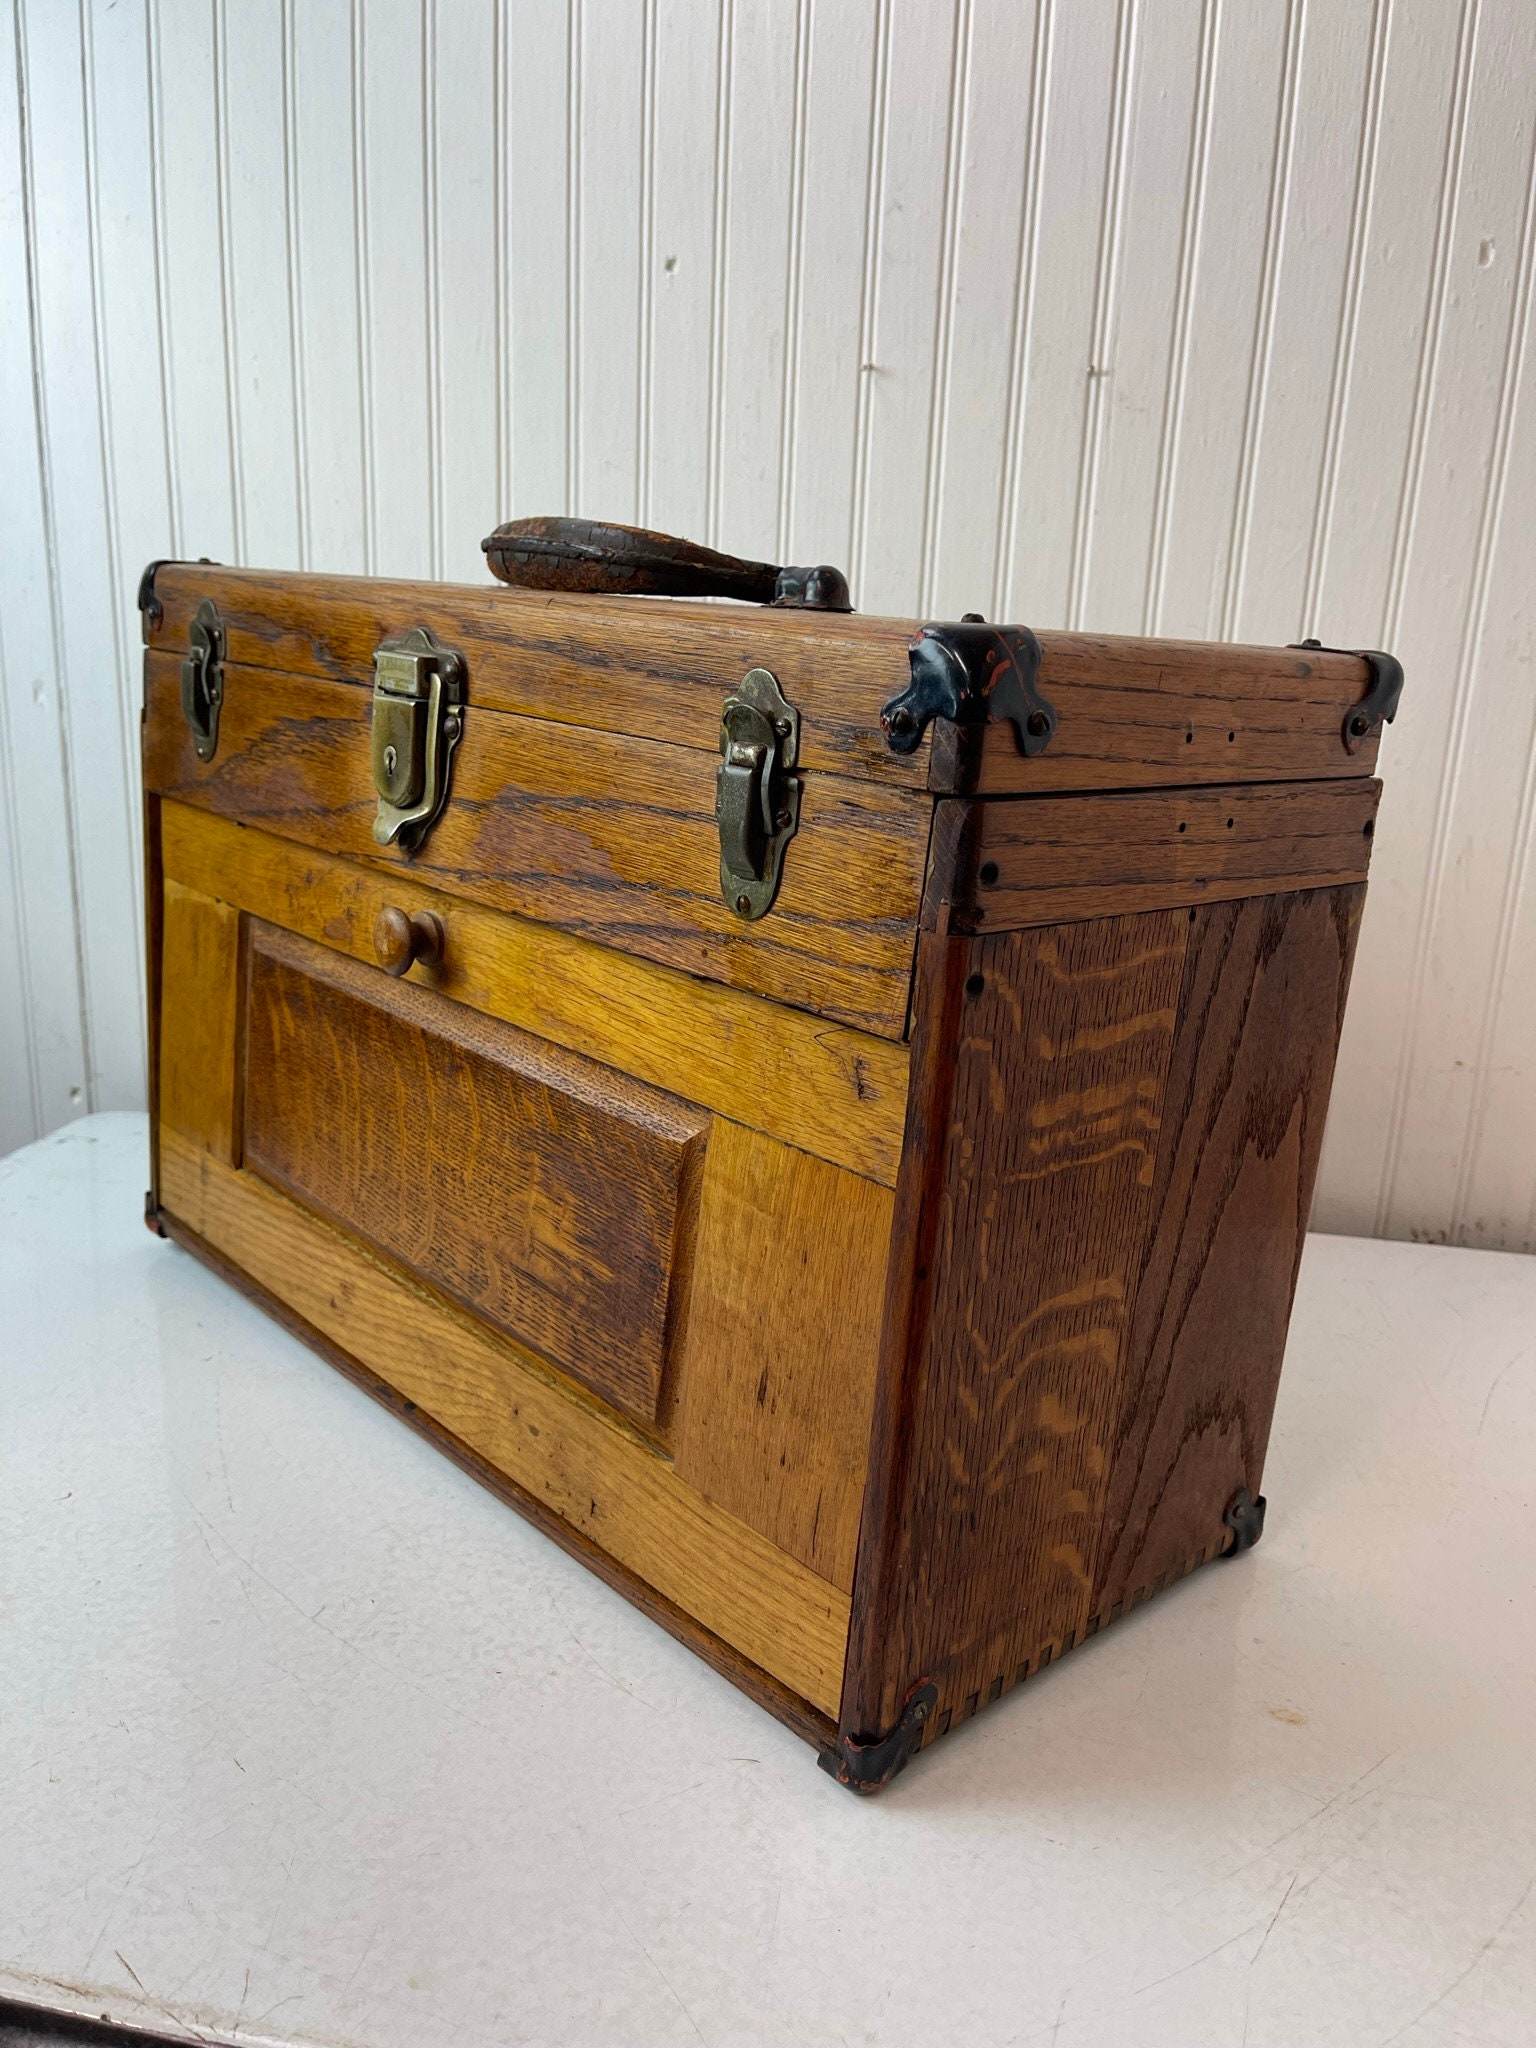 Tool Chest, Machinist, Antique Wood, No Name – Lost Creek Machine